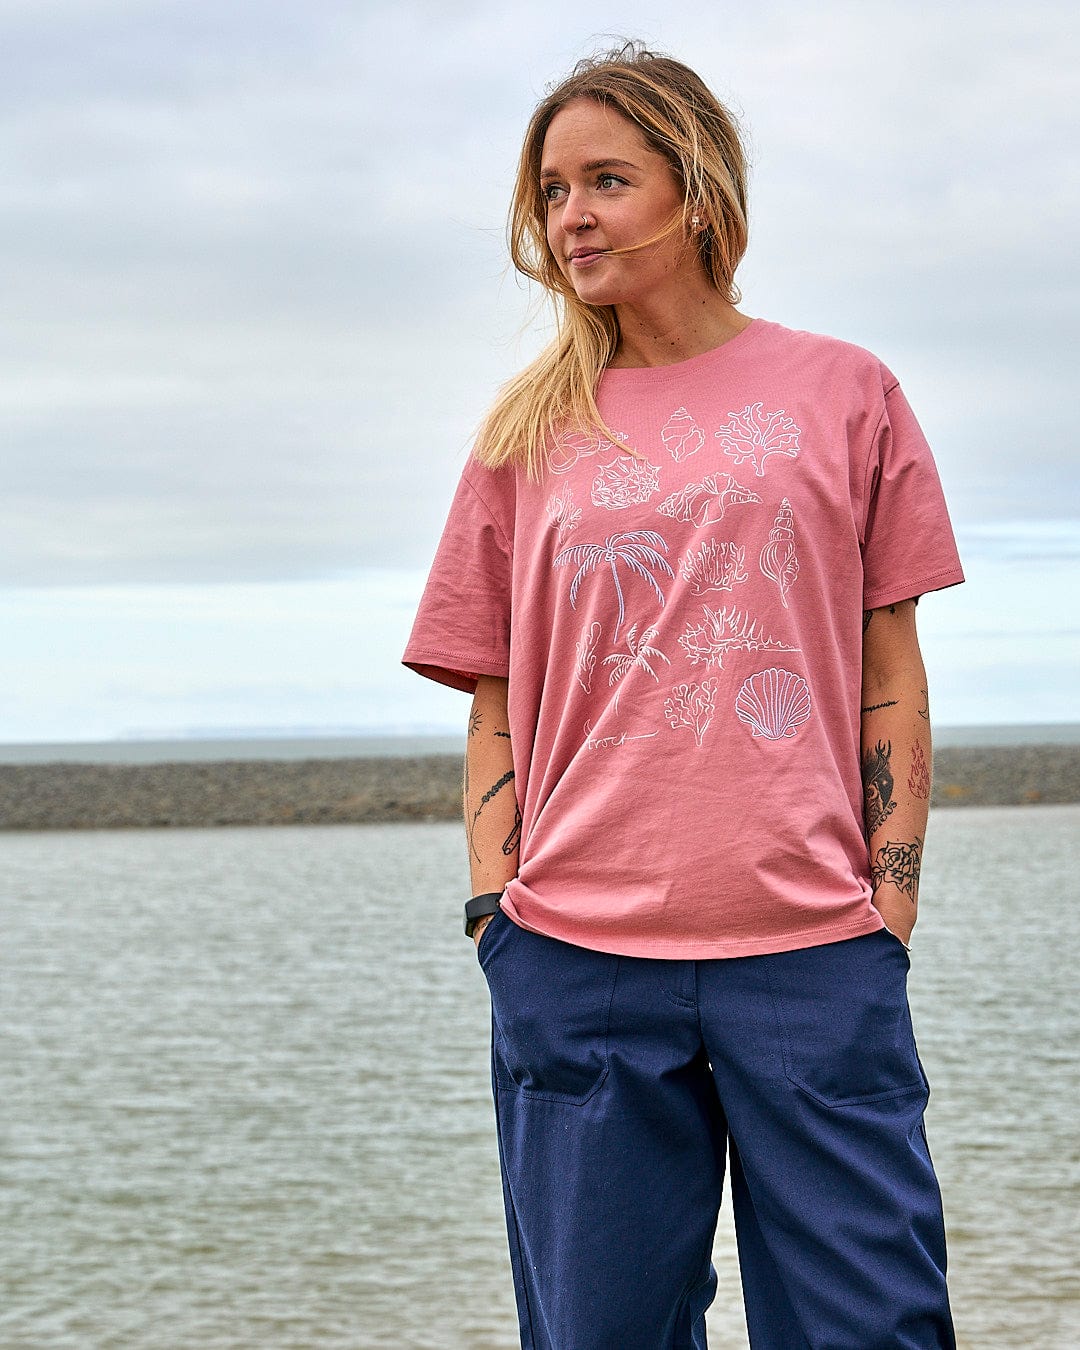 A woman wearing a Saltrock Sea Shells - Womens Relaxed Fit T-Shirt - Mid Pink standing by the water.